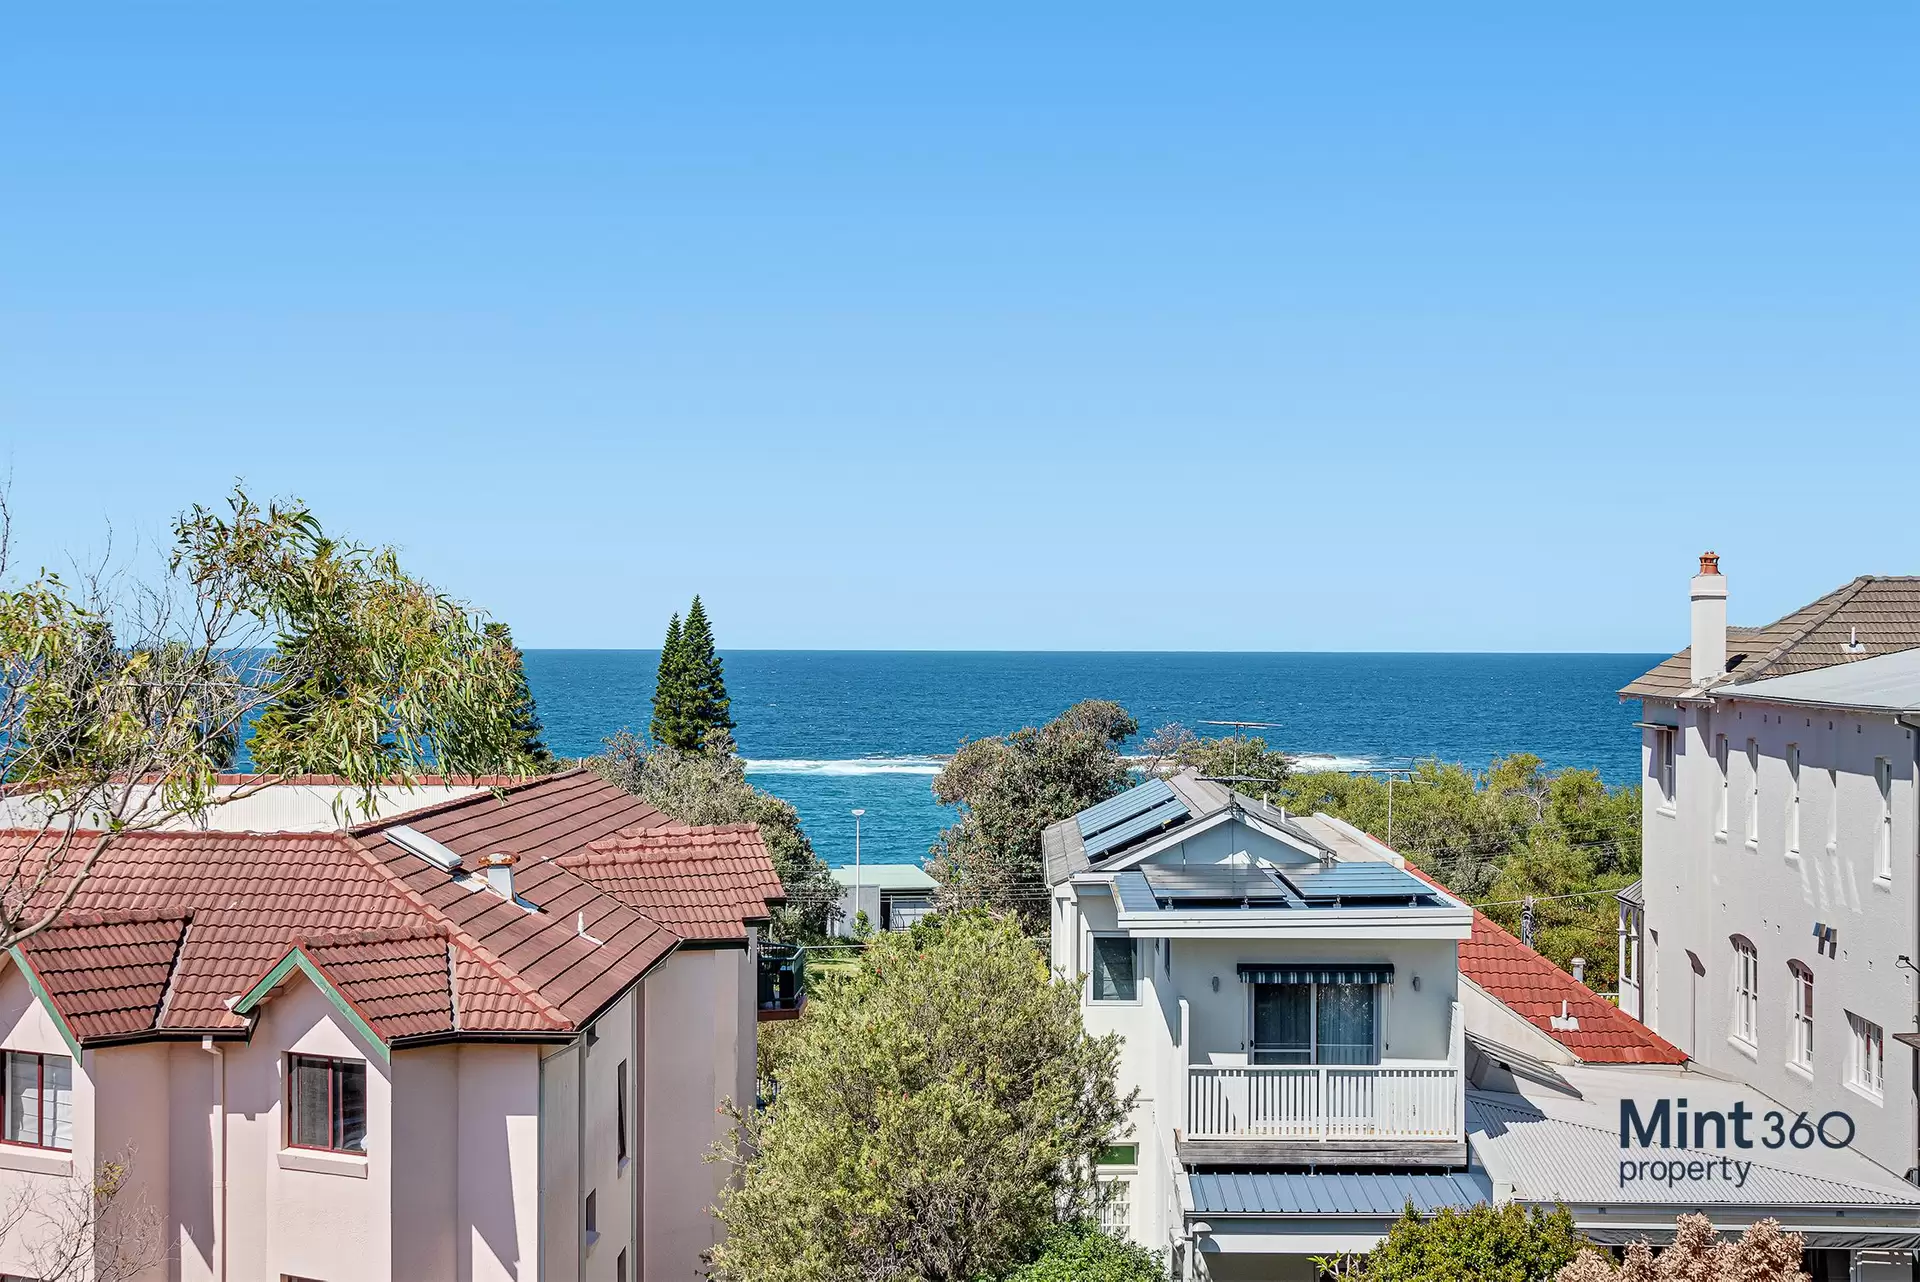 14/289 Arden Street, Coogee Leased by Raine & Horne Randwick | Coogee - image 1